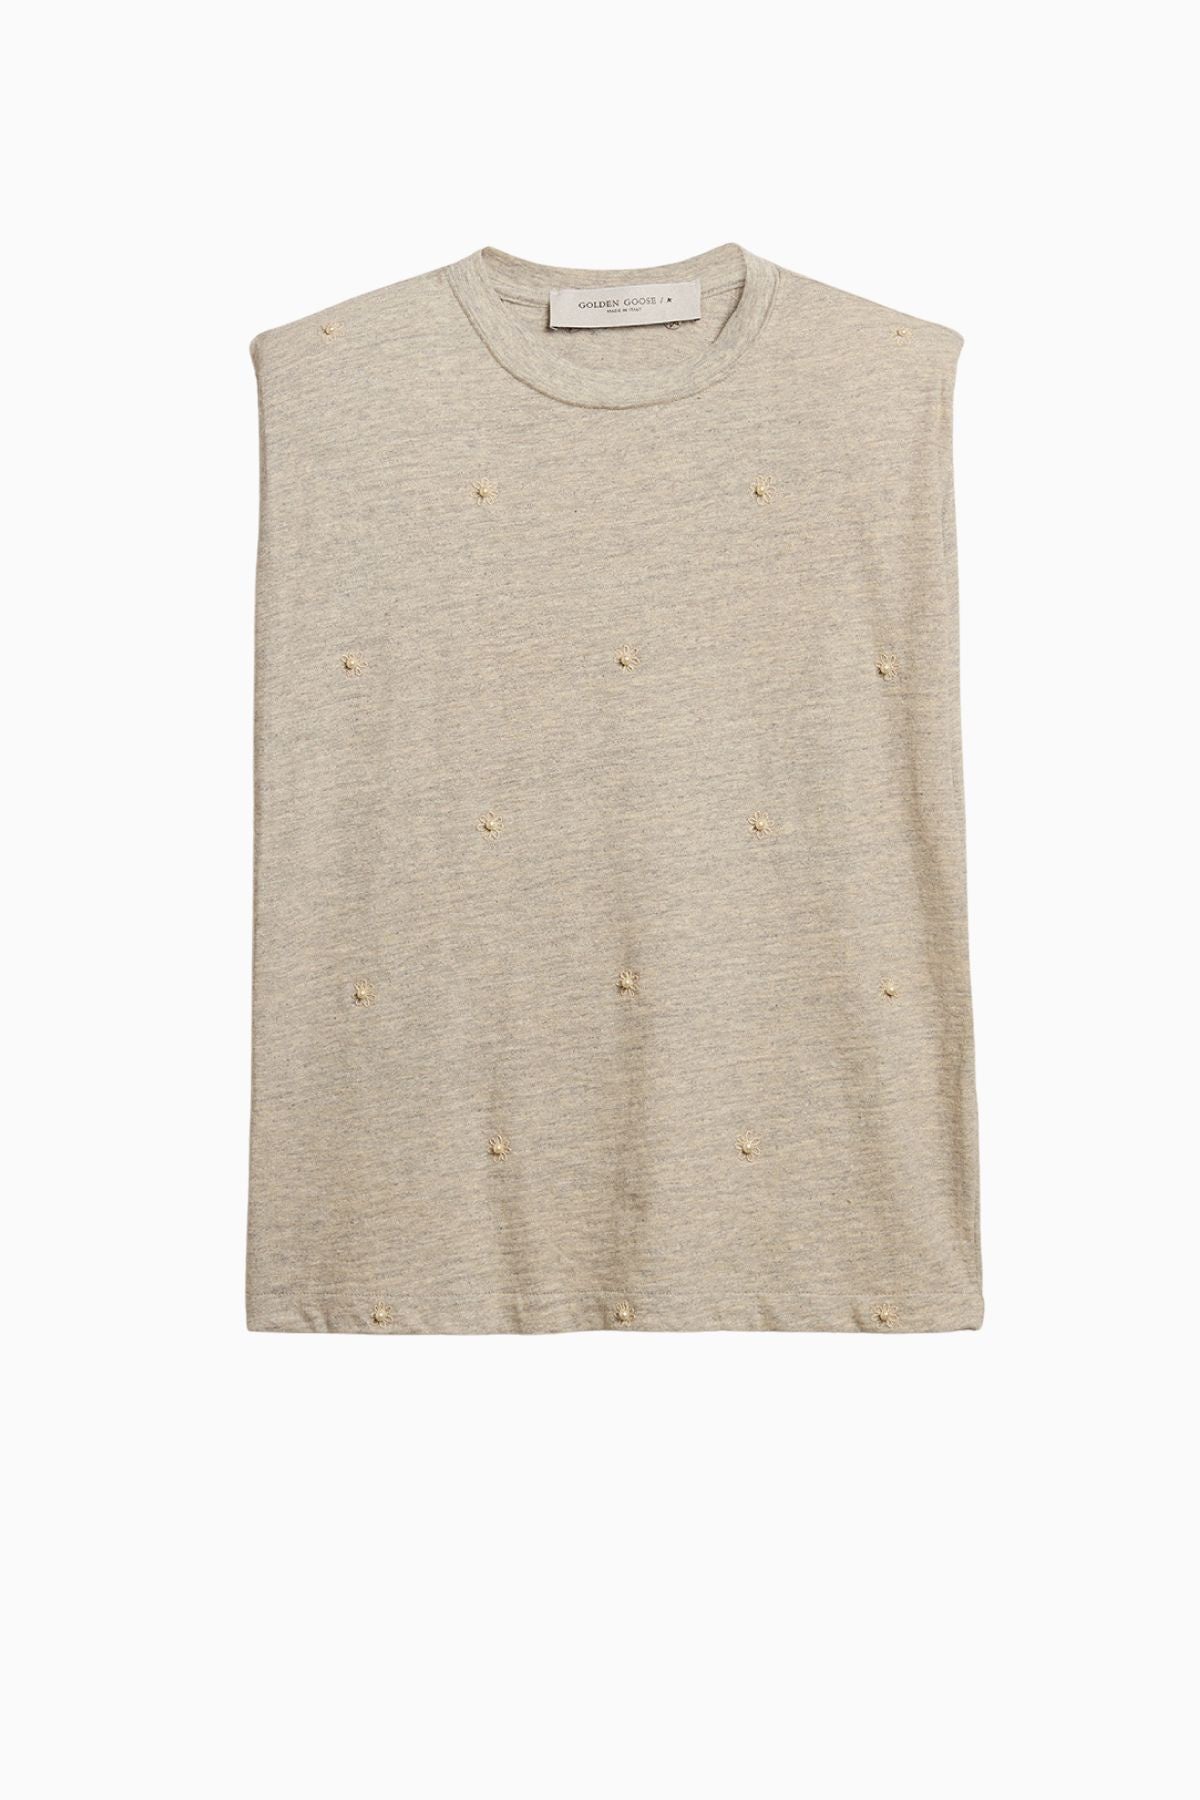 Golden Goose Aged Sleeveless T-Shirt with Scattered Pearl Embroidery - Melange Grey/ Heritage White